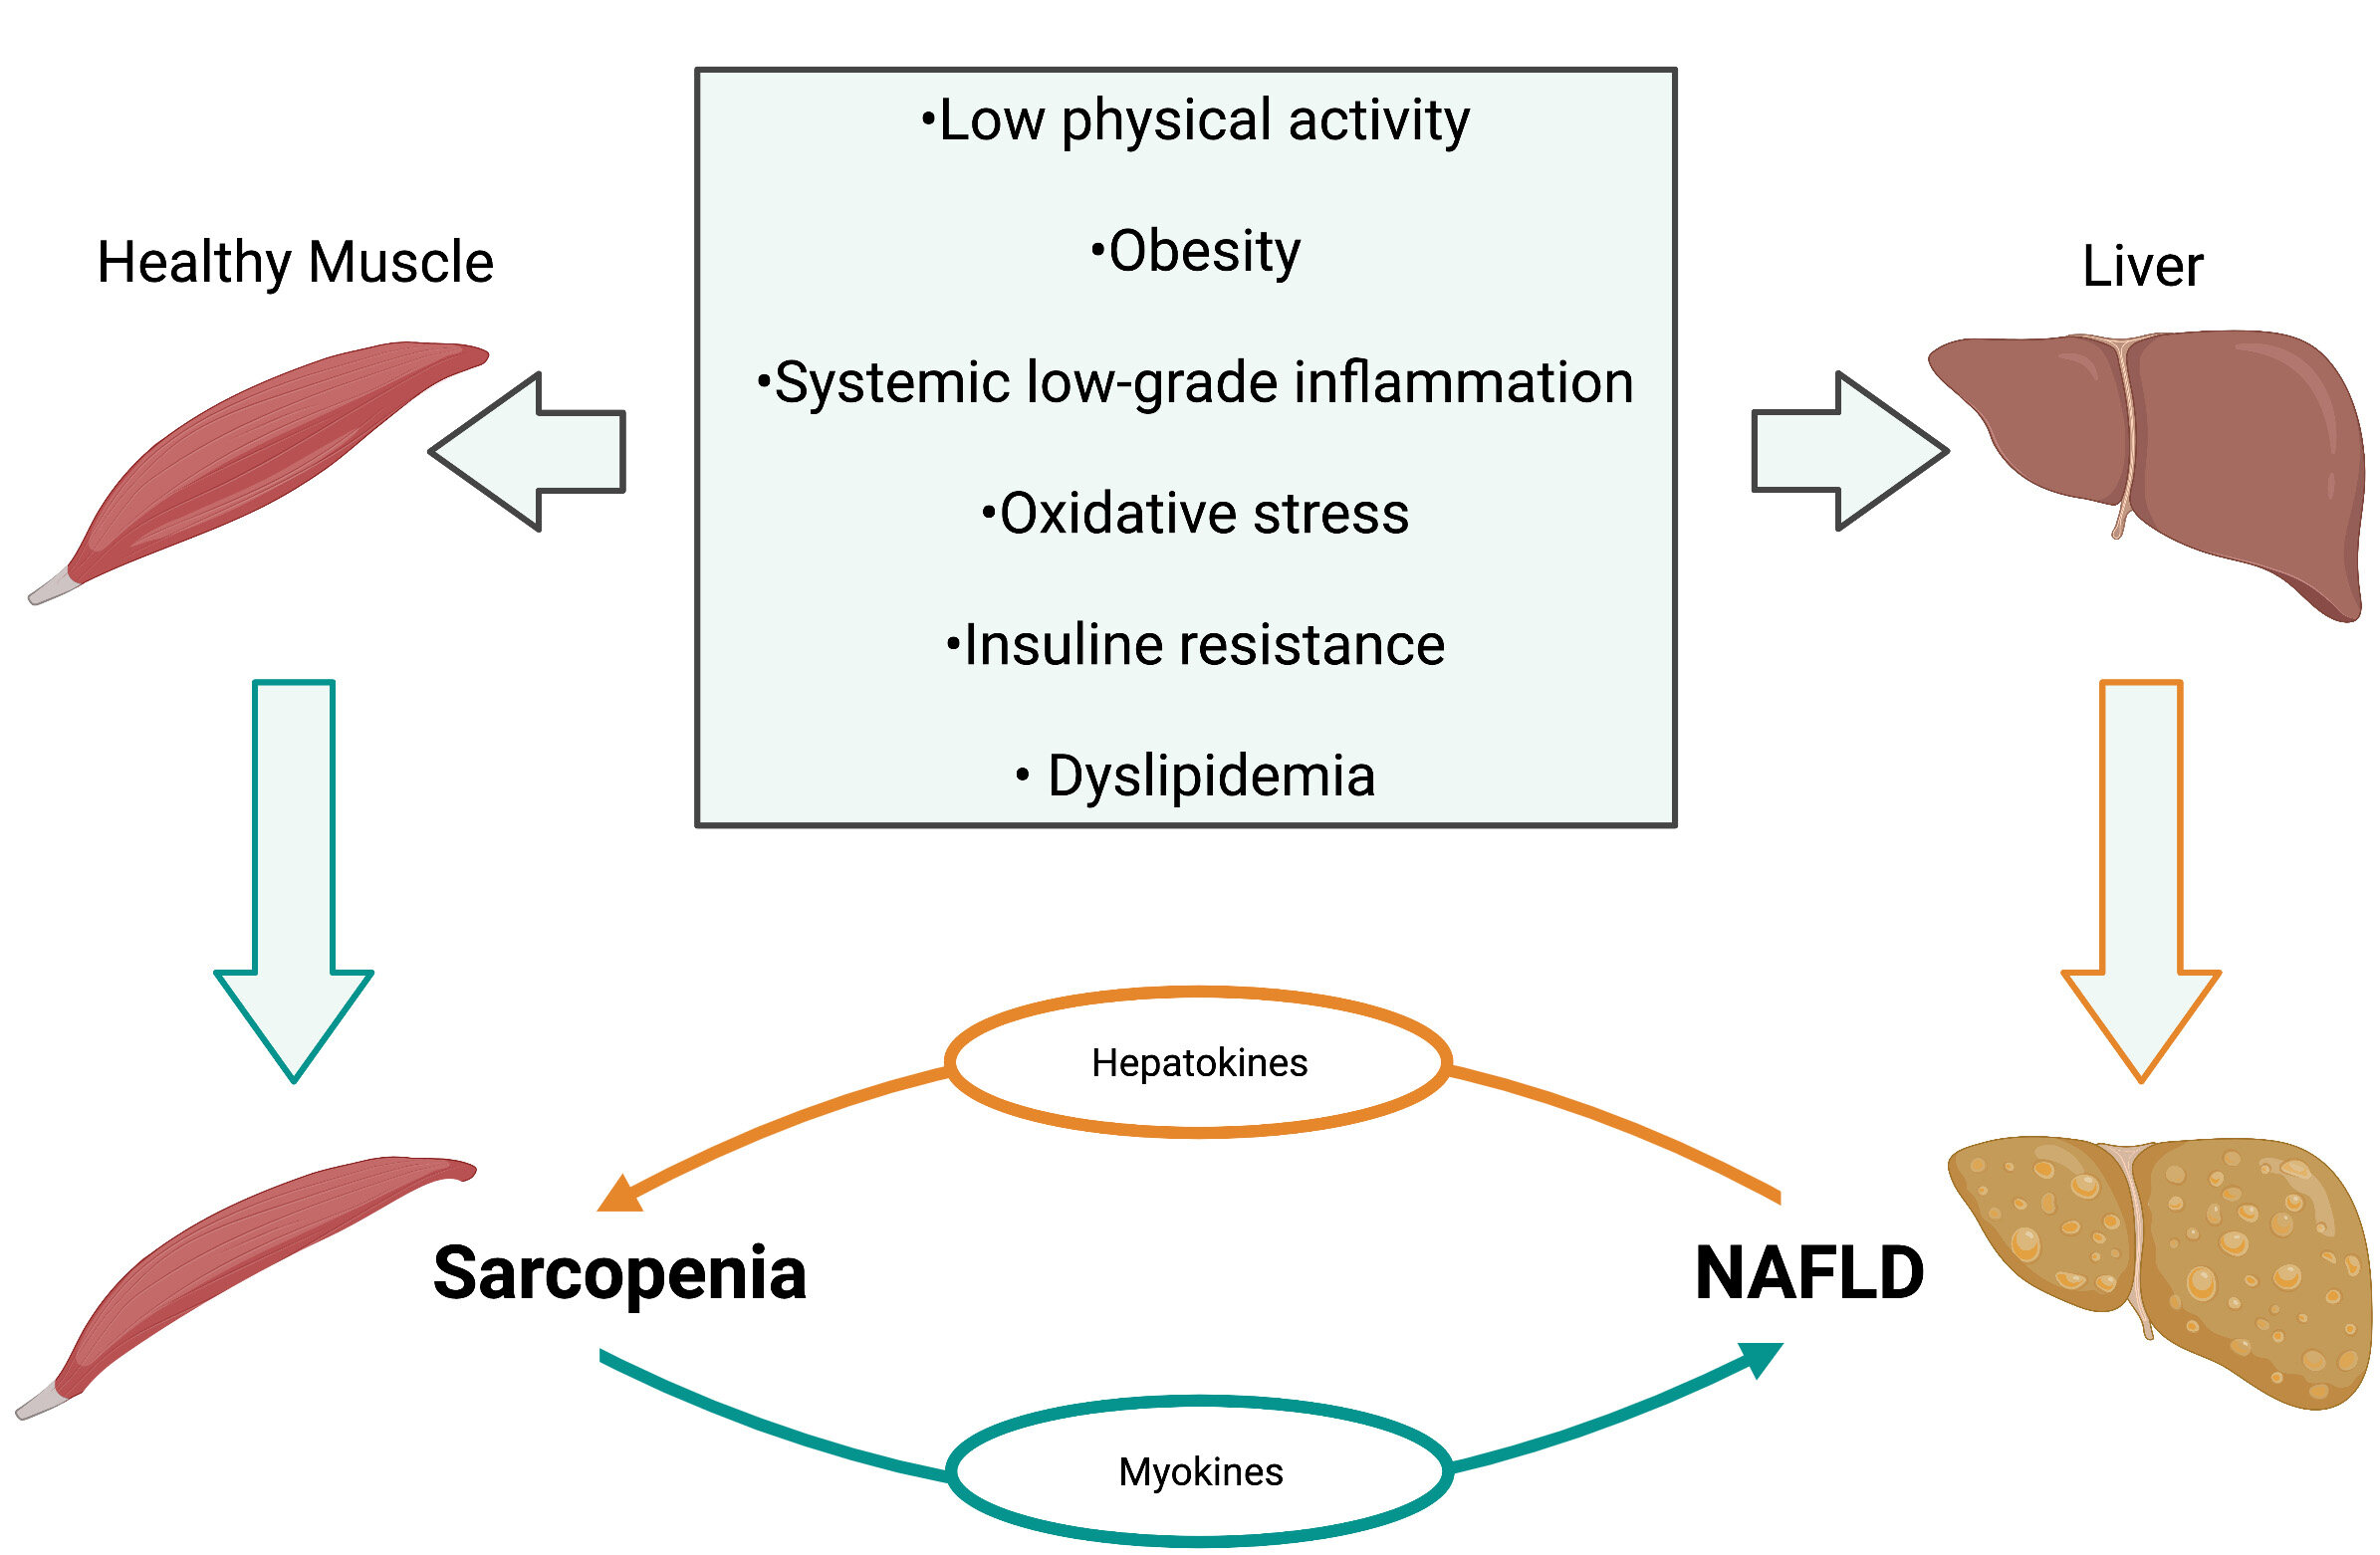 Sarcopenia in the setting of nonalcoholic fatty liver